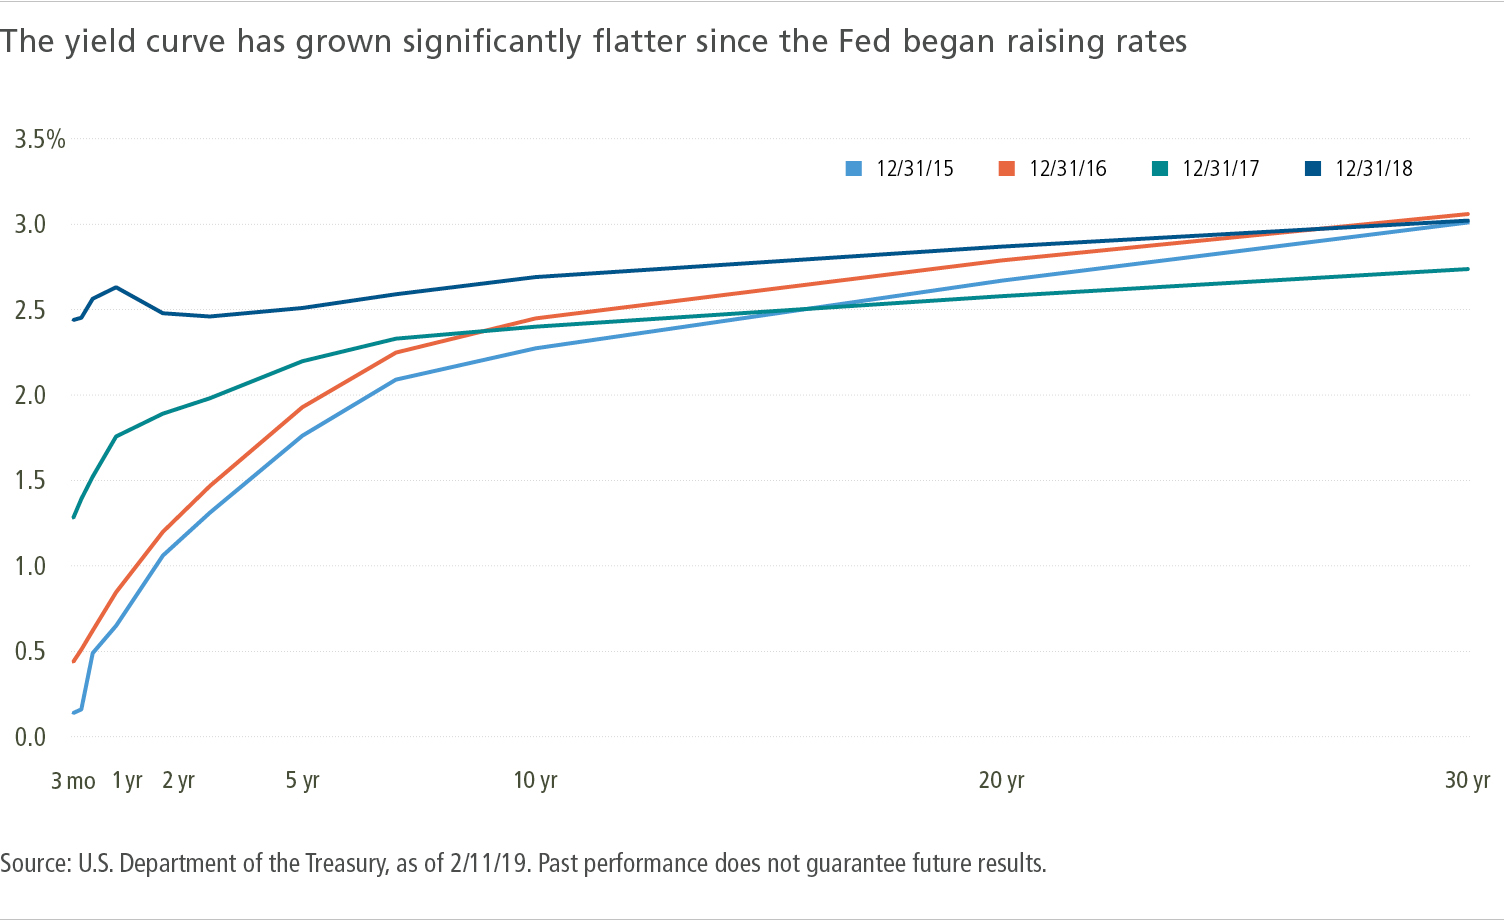 The yield curve has grown significantly flatter since the Fed began raising rates